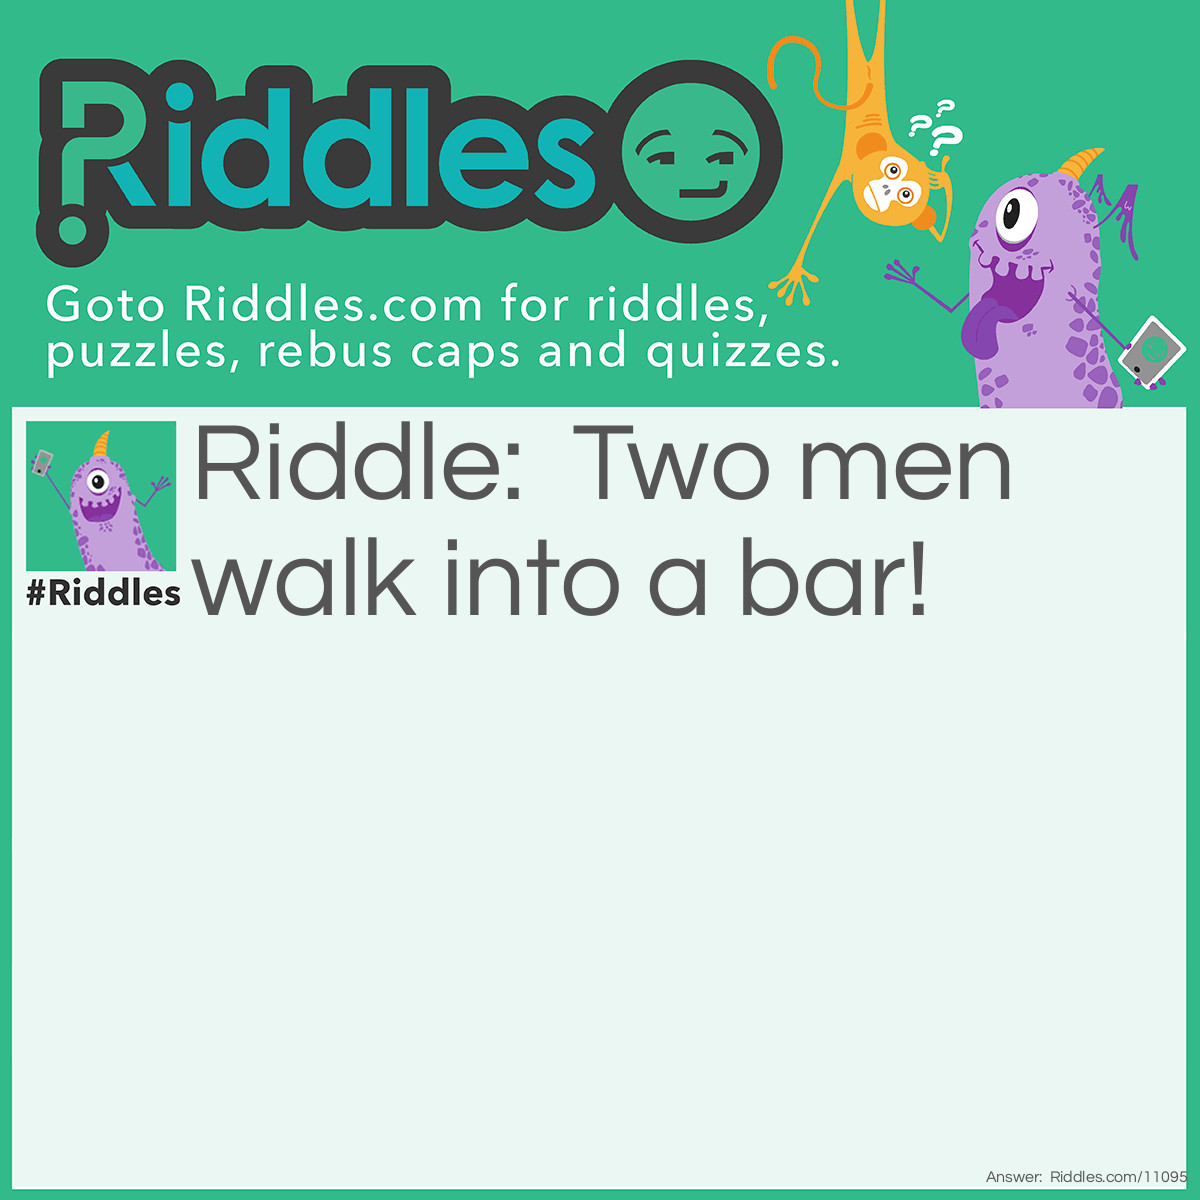 Riddle: Two men walk into a bar! Answer: Ouch!